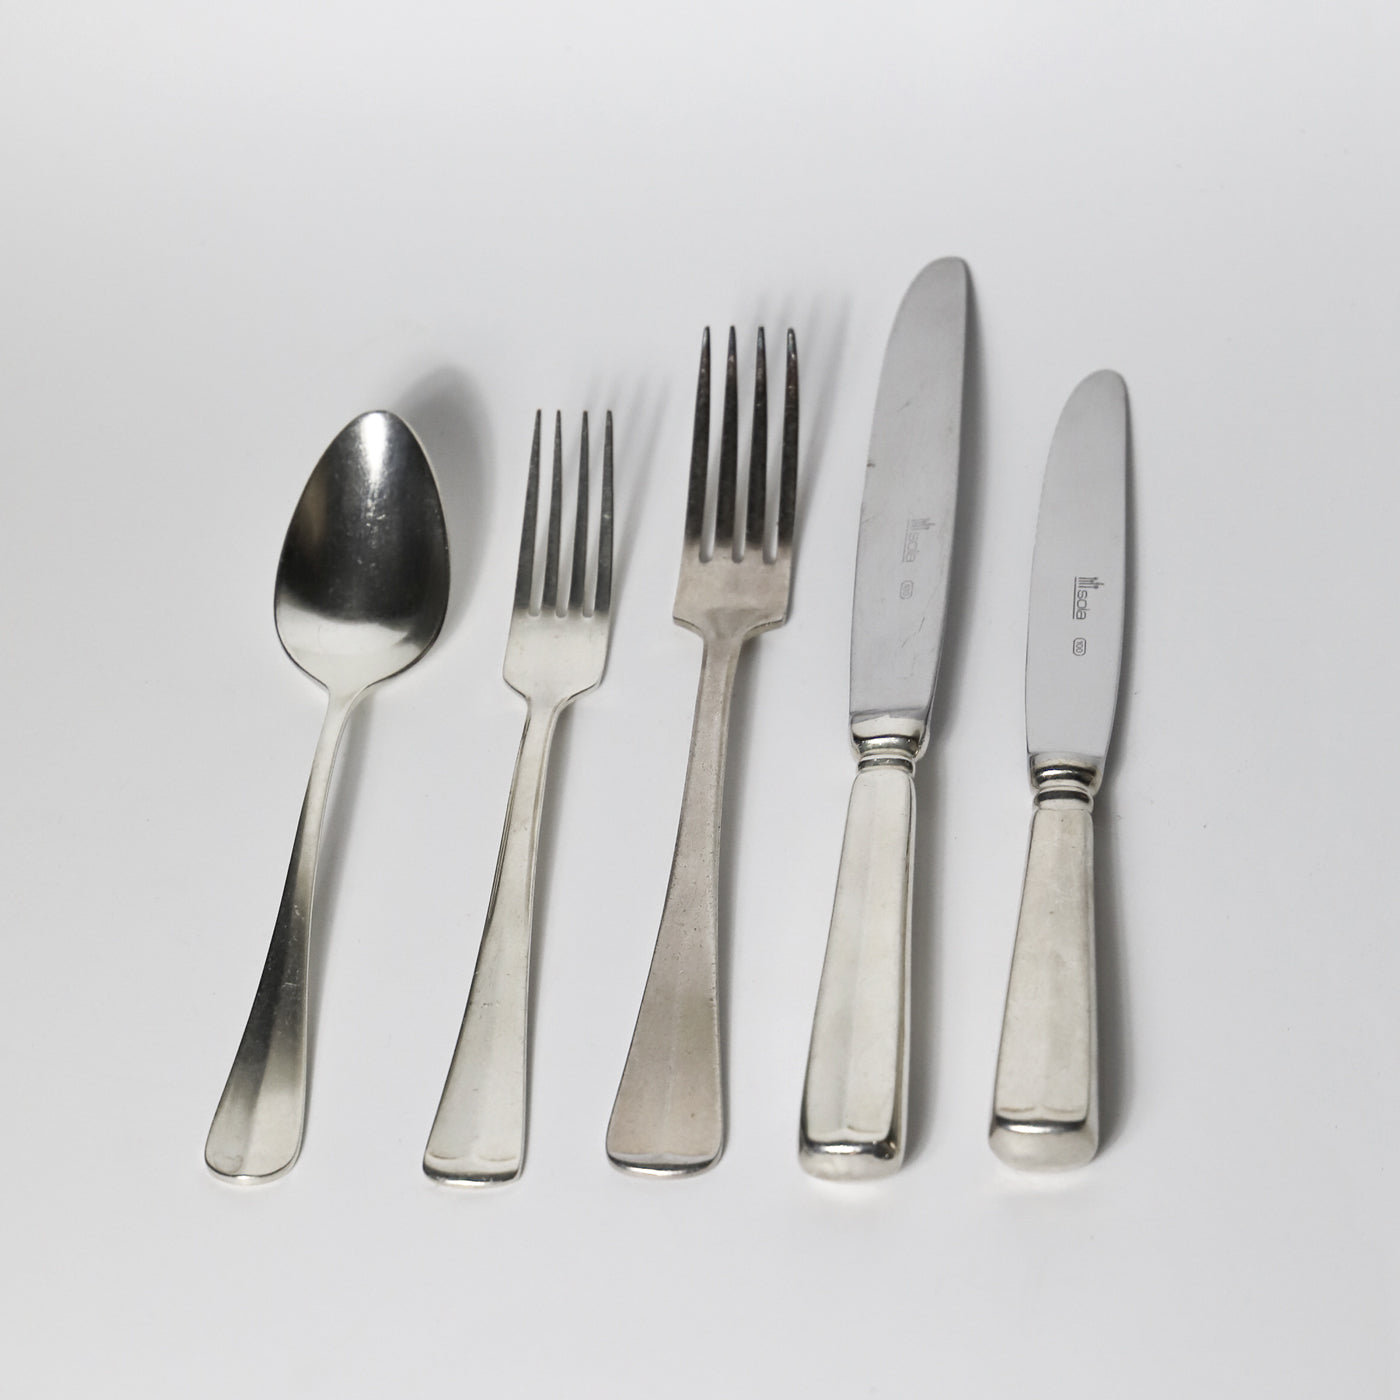 Vintage Silver Plated Flatware Set by Sola